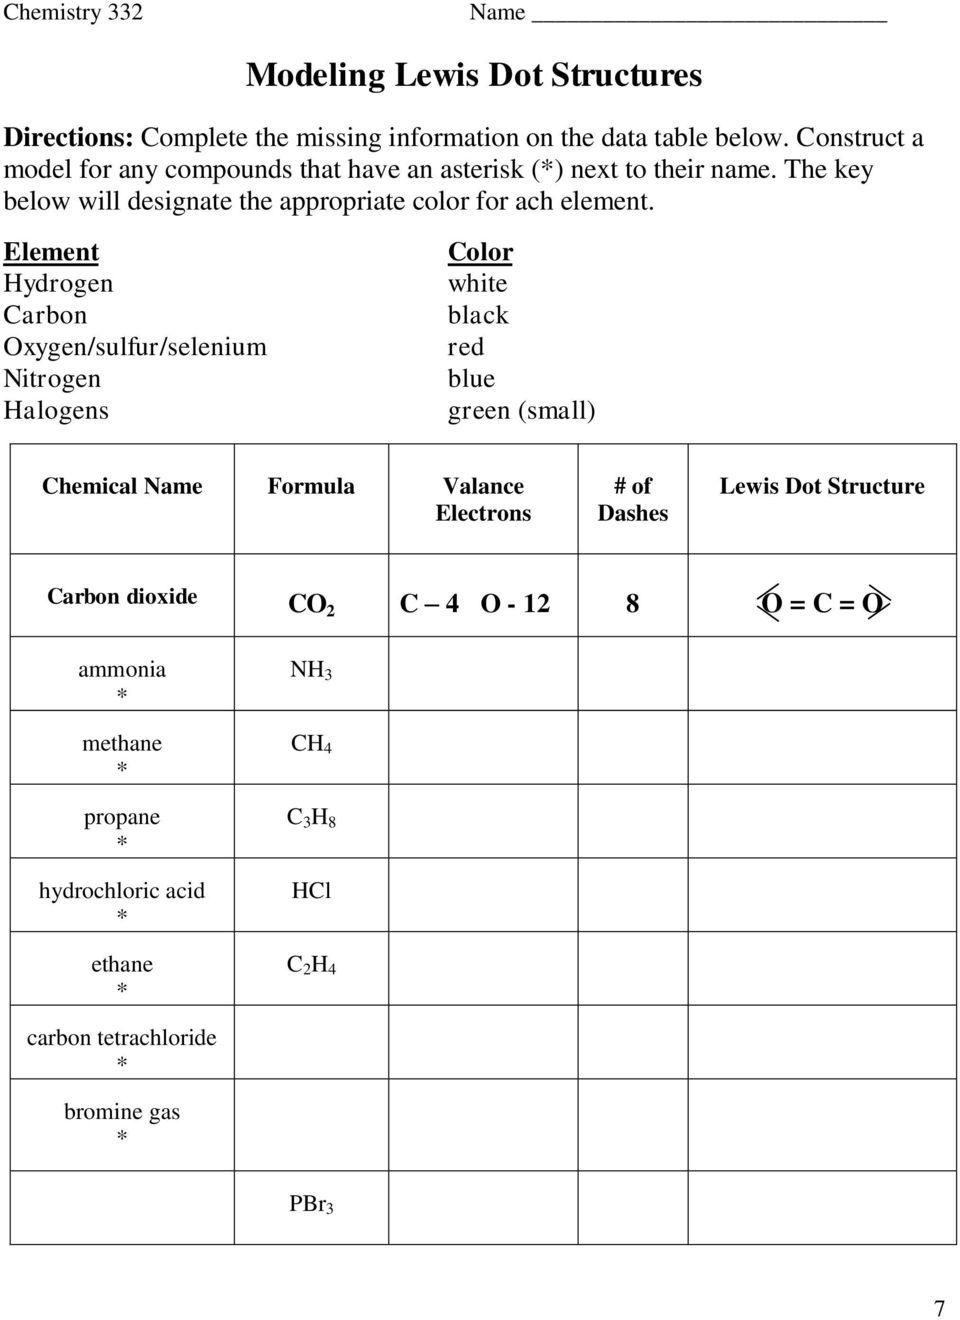 COVALENT COMPOUNDS. Chemistry PDF Free Download With Lewis Dot Structure Worksheet